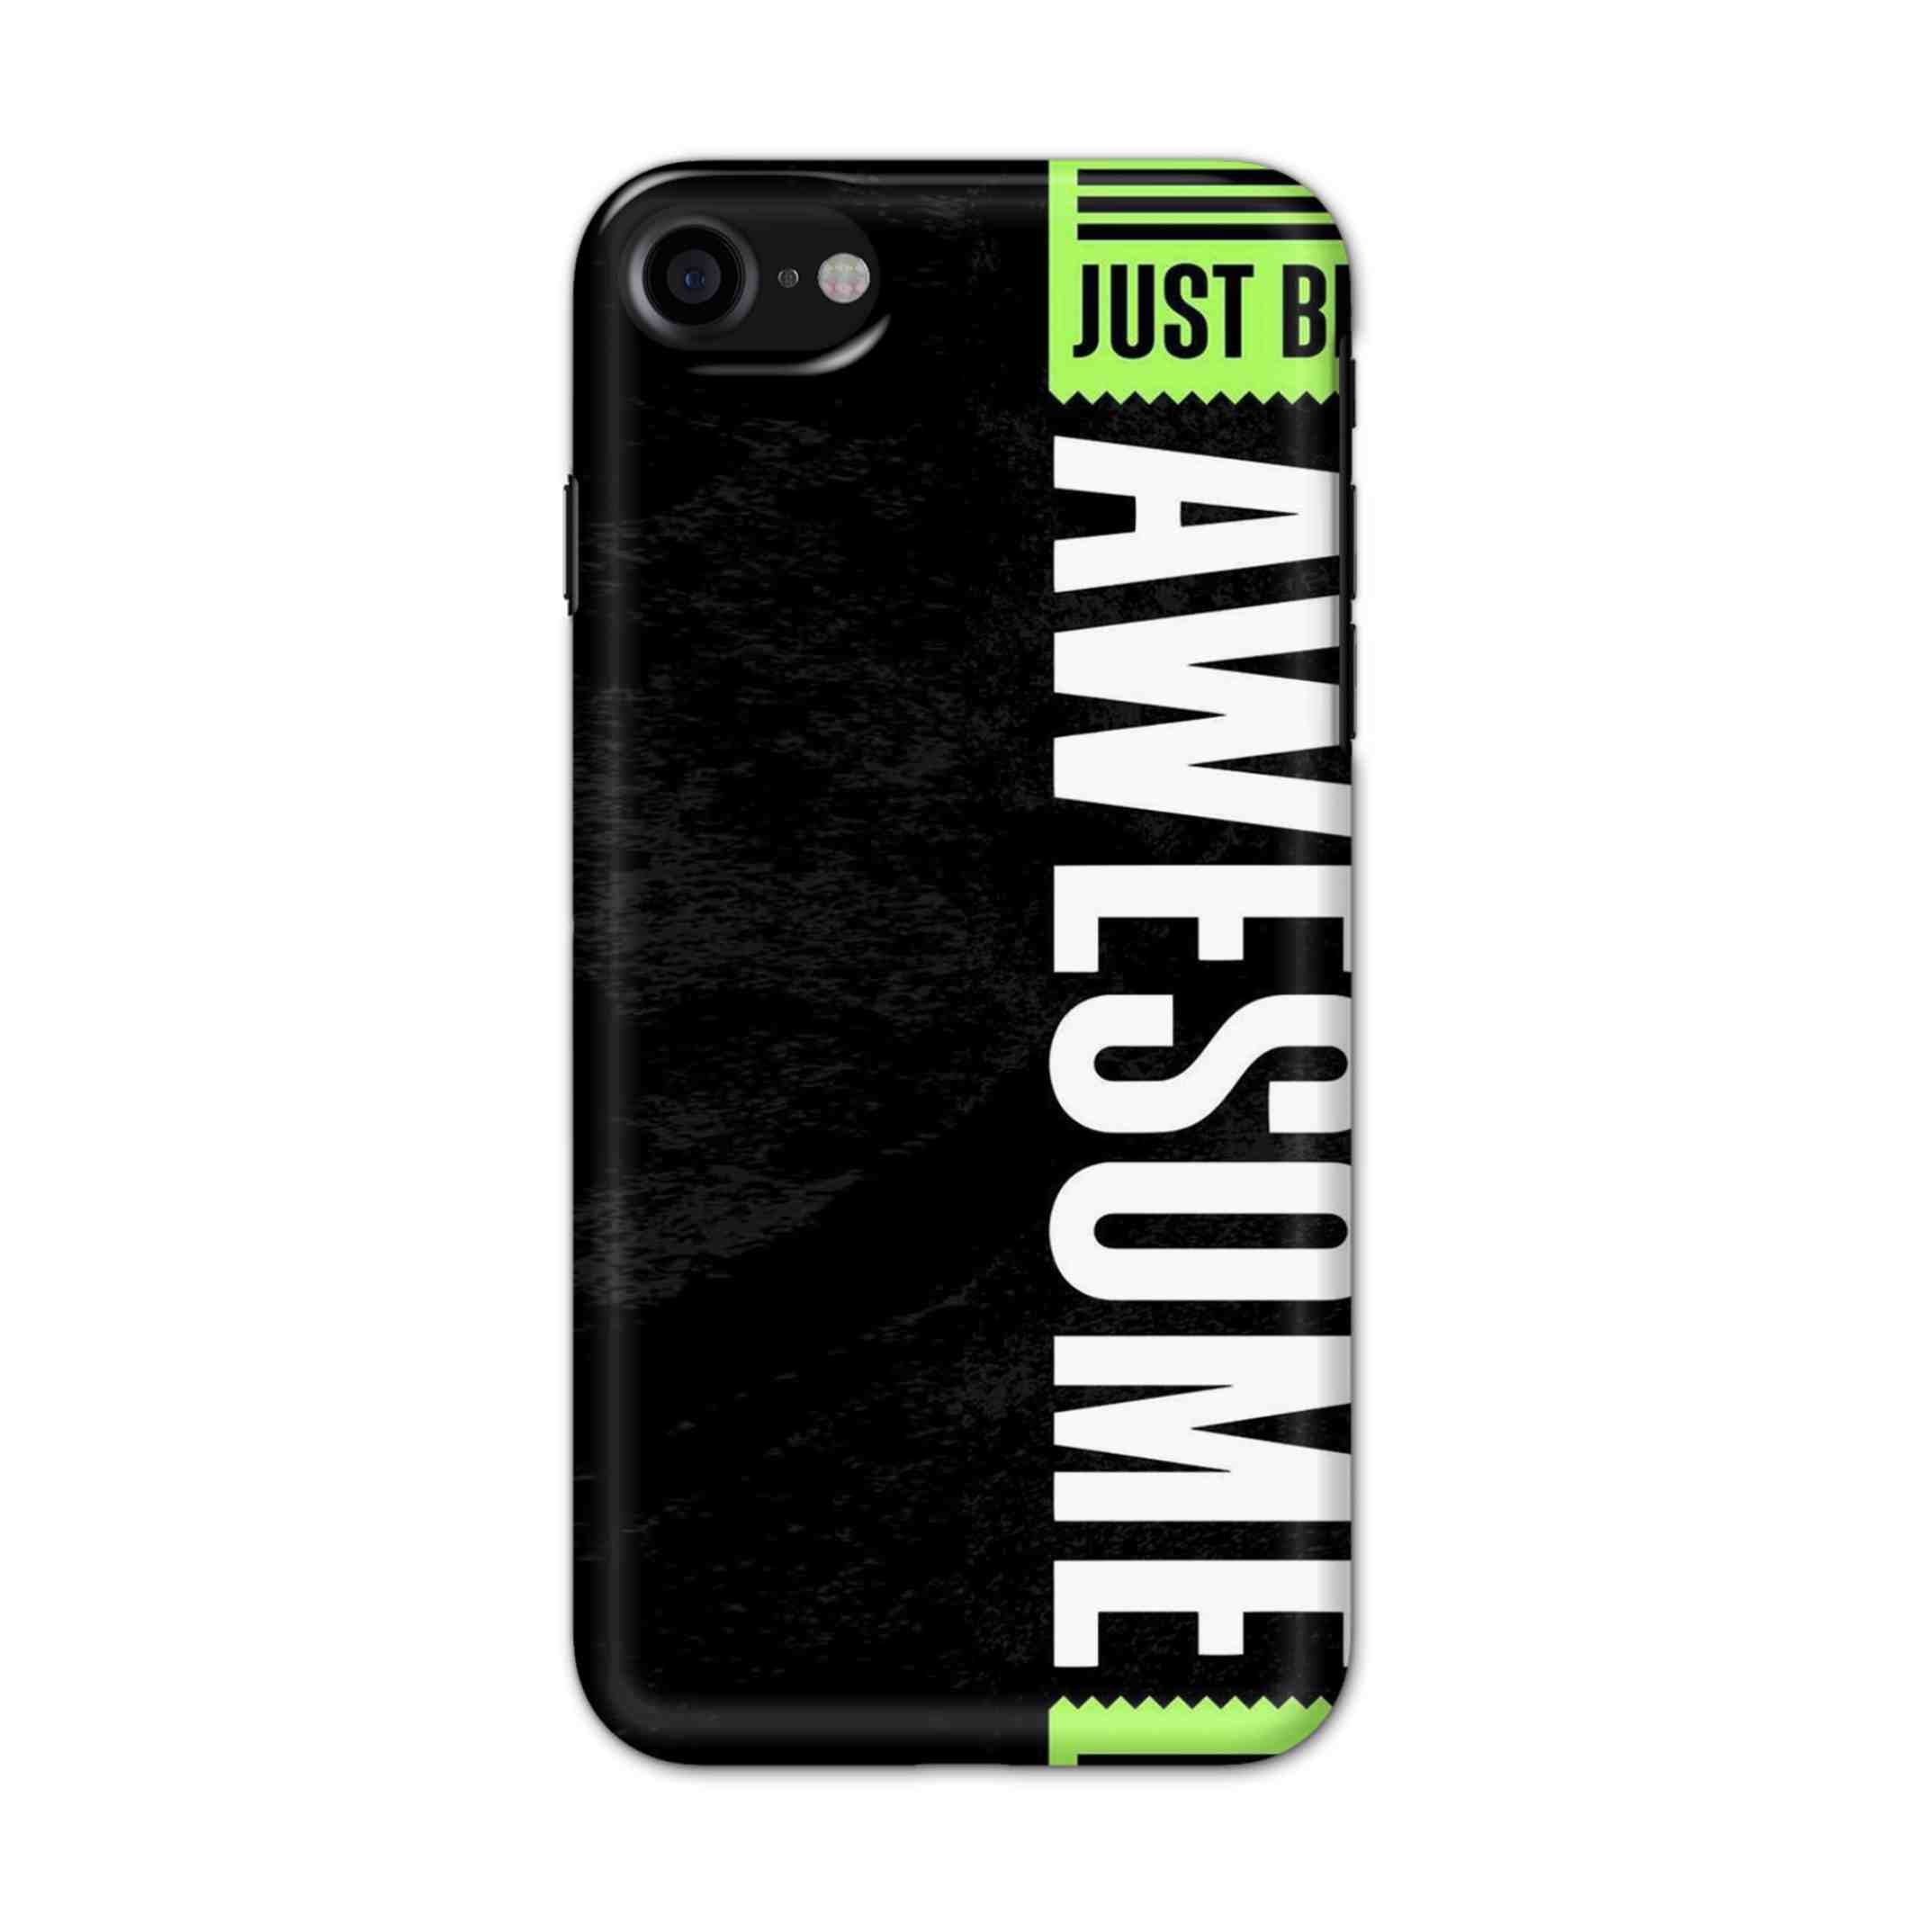 Buy Awesome Street Hard Back Mobile Phone Case/Cover For iPhone 7 / 8 Online